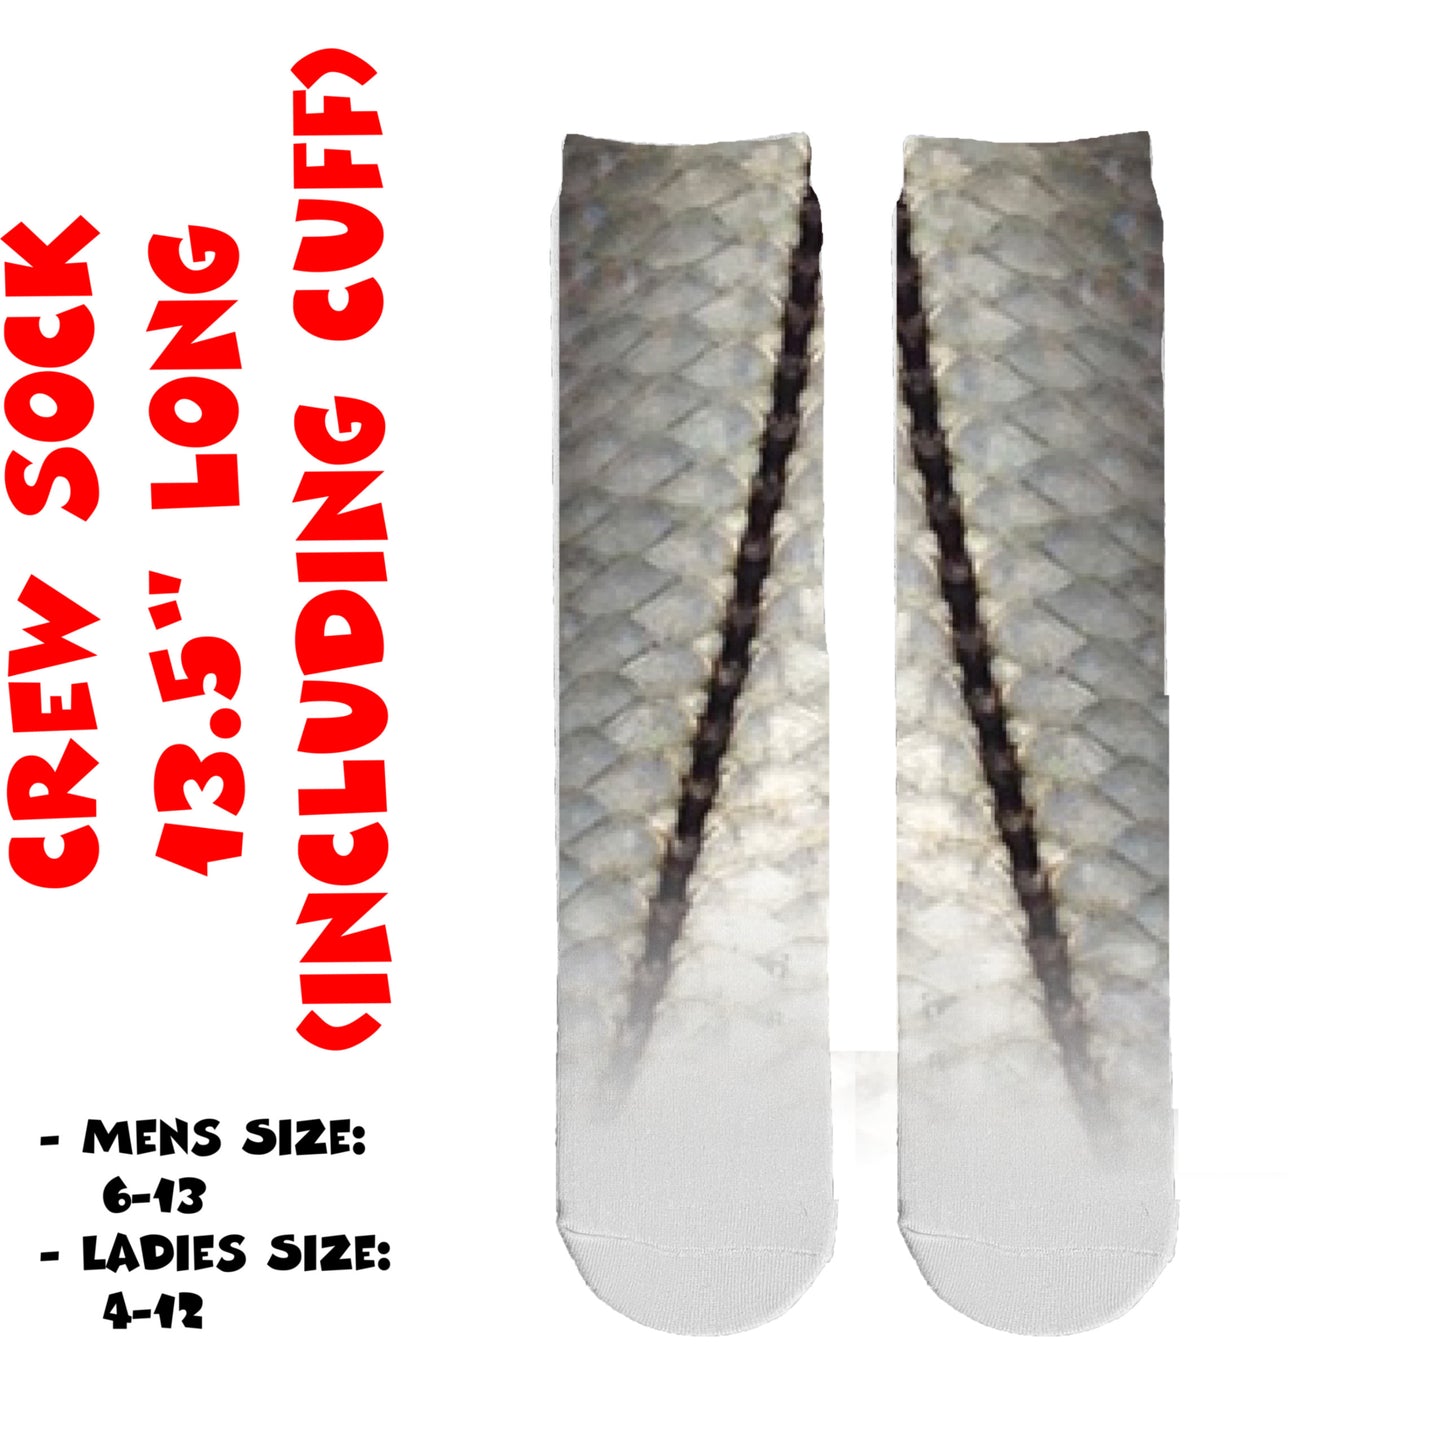 Snook Scale Fishing and Boat Socks - Skiff Life